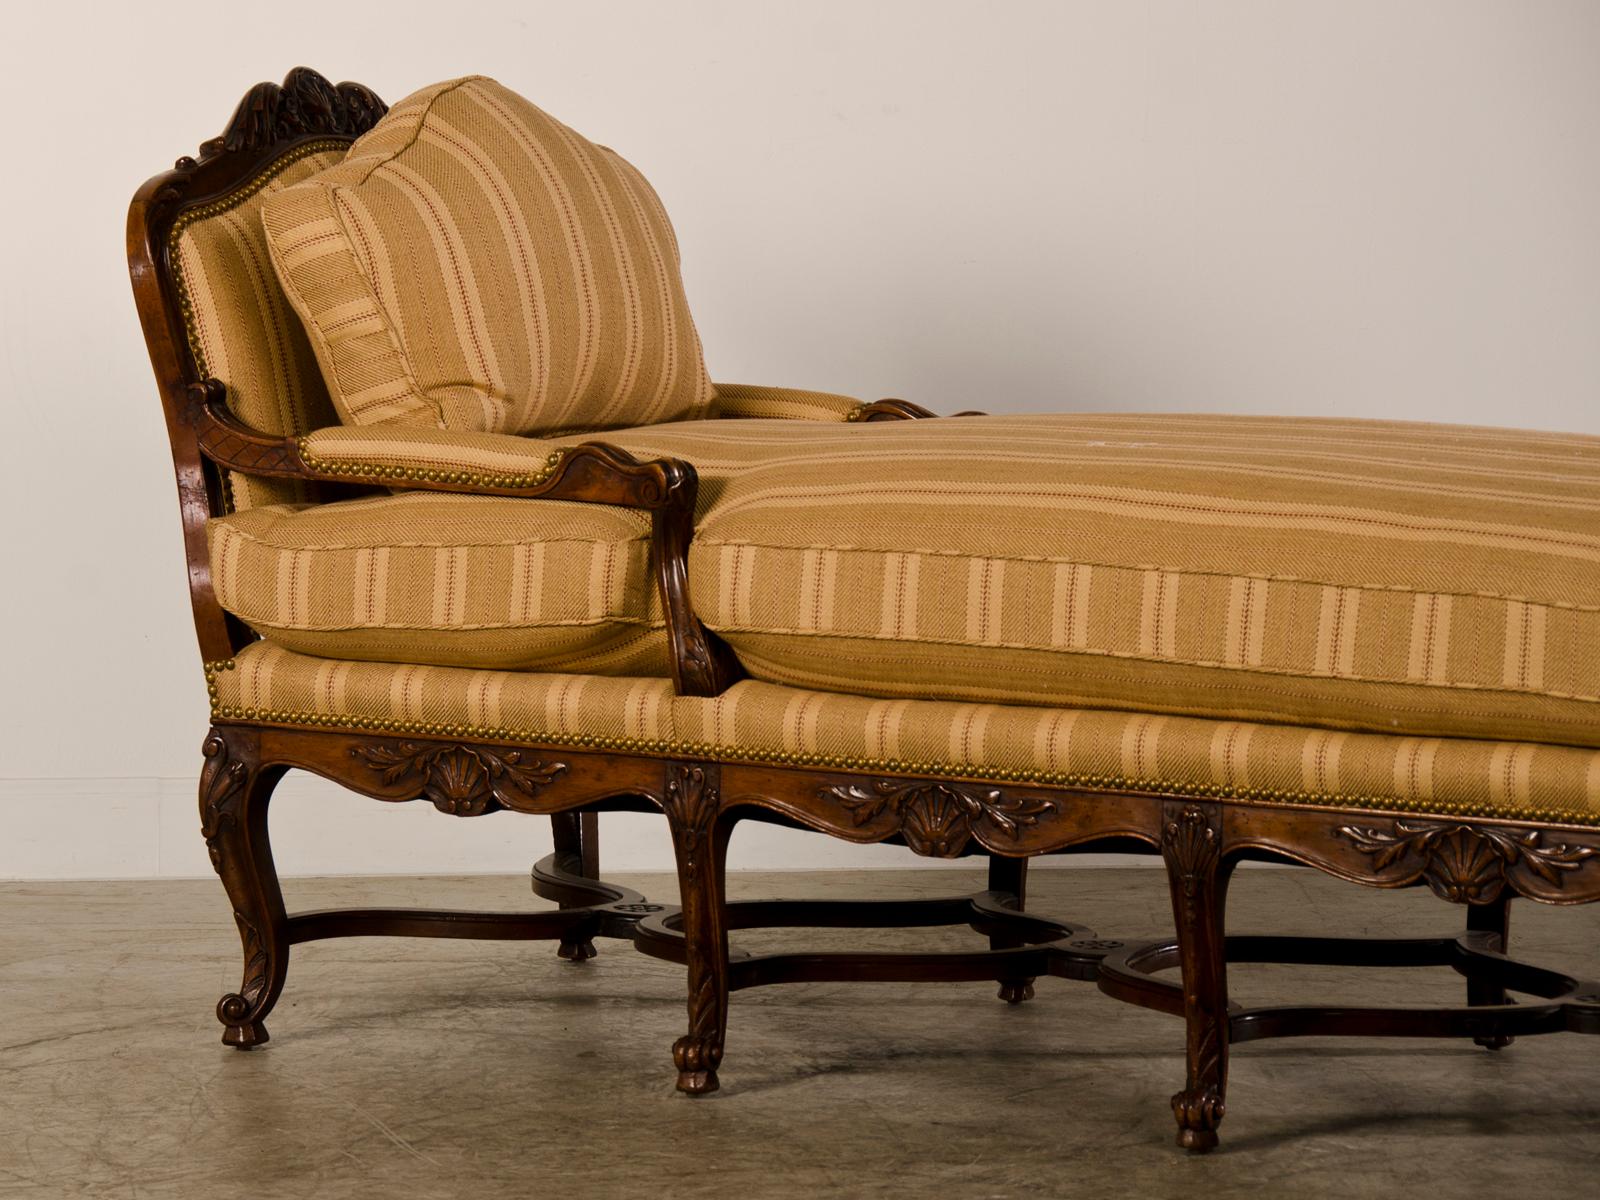 A rare Régence period (1715-1723) walnut chaise longue from France circa 1720. The chaise longue revolutionized life among the upper classes in early eighteenth century France with its sensuous shape and level of comfort that had not been seen